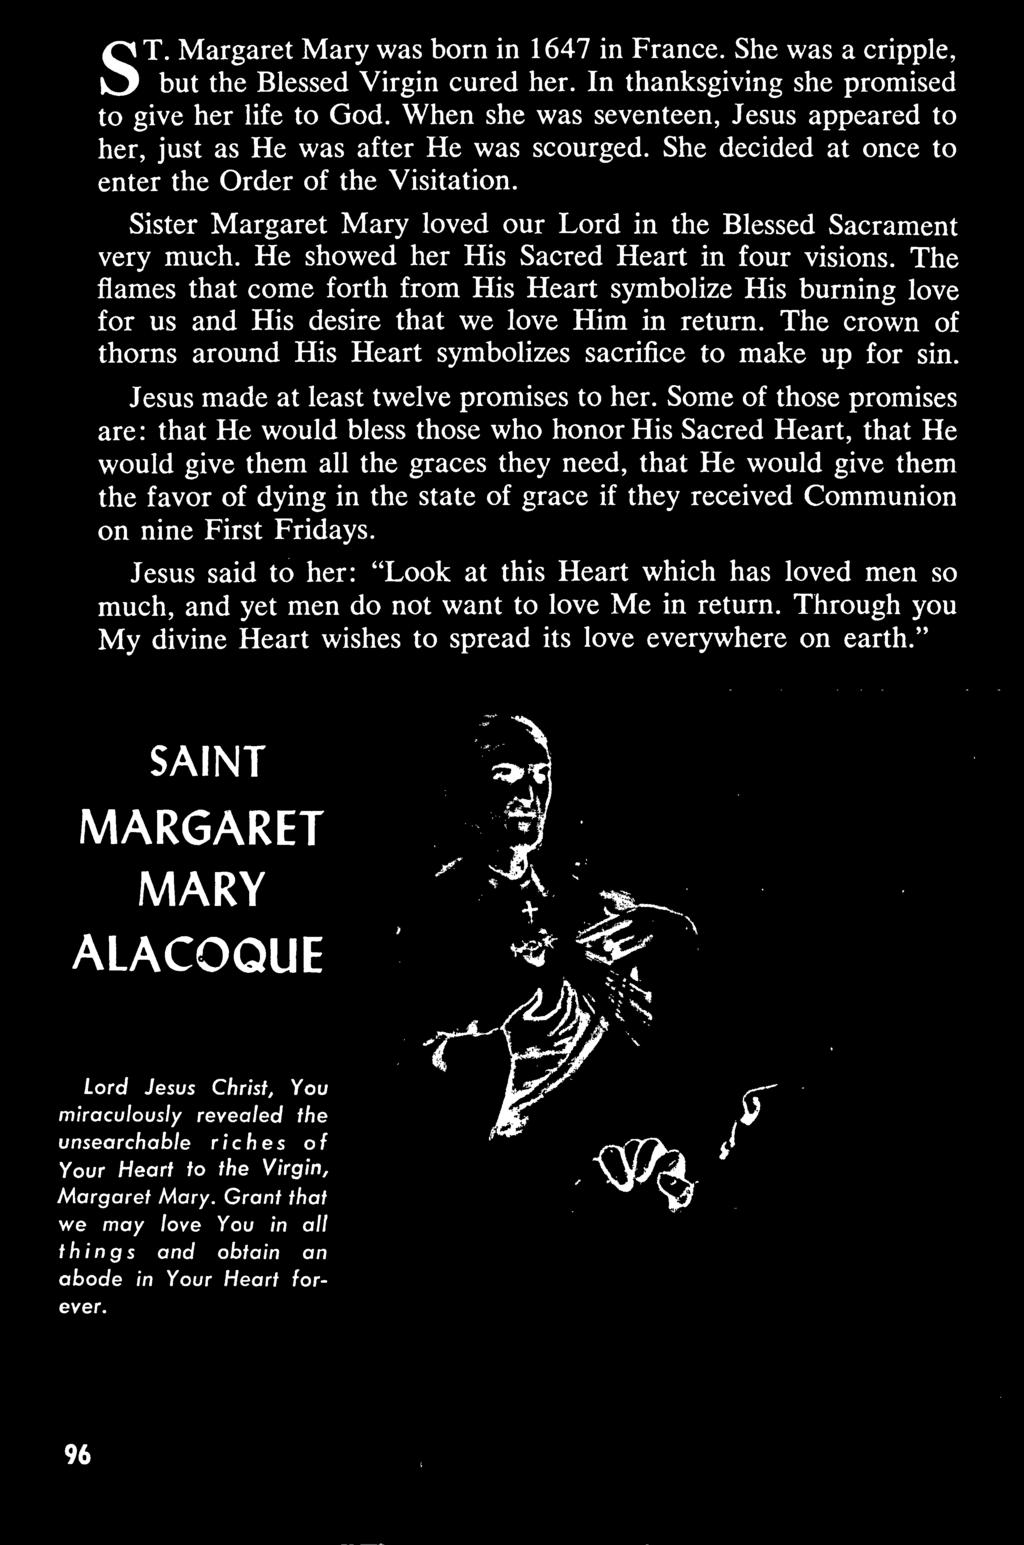 Sister Margaret Mary loved our Lord in the Blessed Sacrament very much. He showed her His Sacred Heart in four visions.